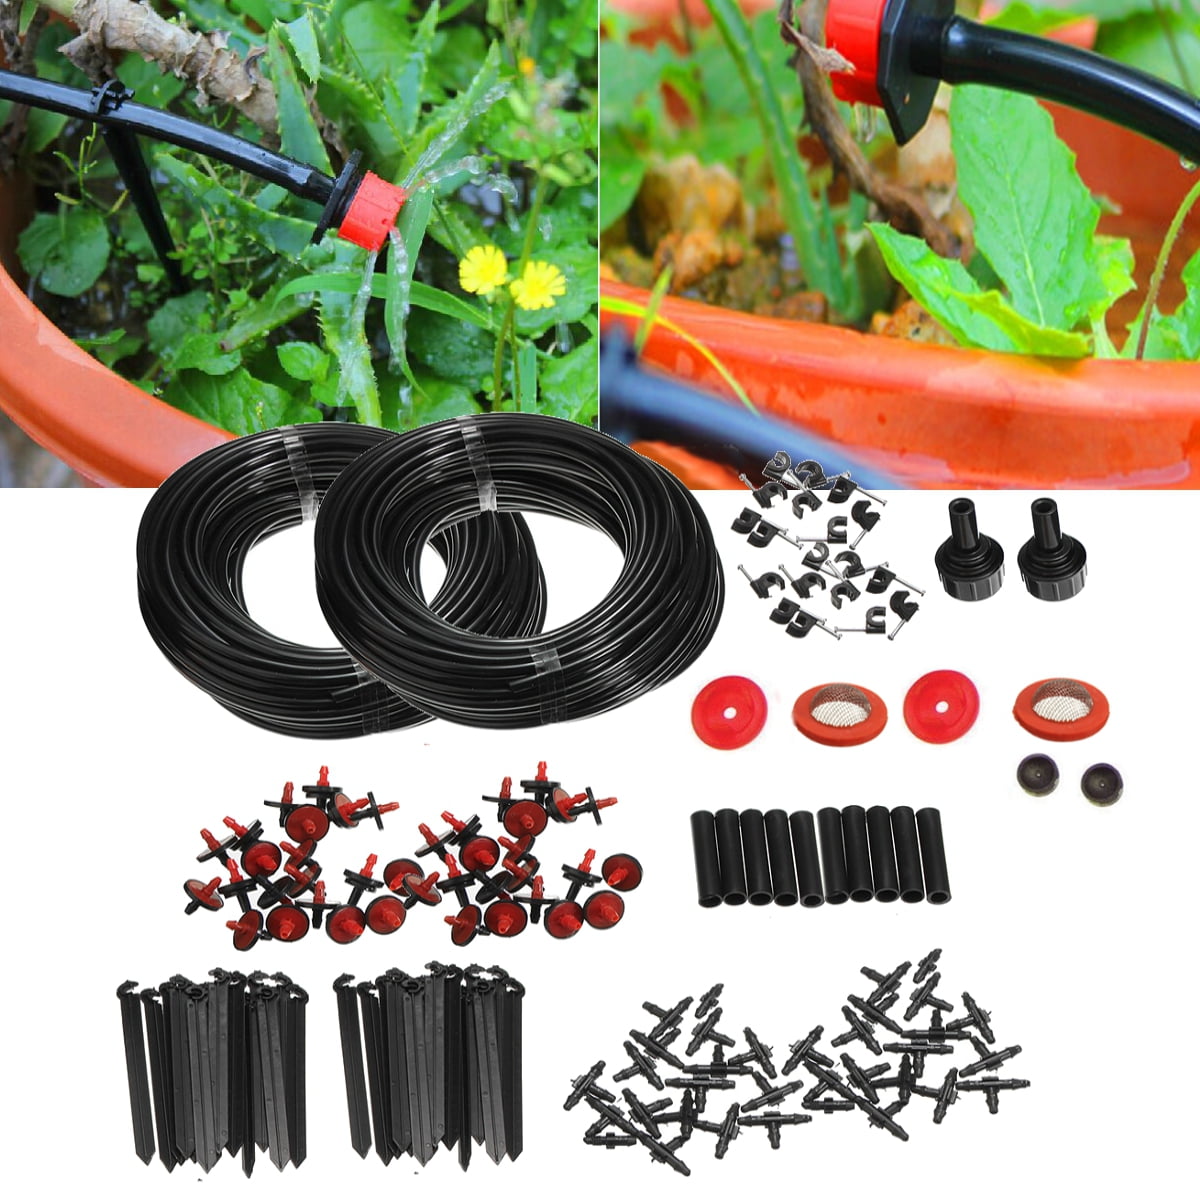 MICRO IRRIGATION WATERING KIT AUTOMATIC GARDEN PLANT GREENHOUSE DRIP SYSTEM 